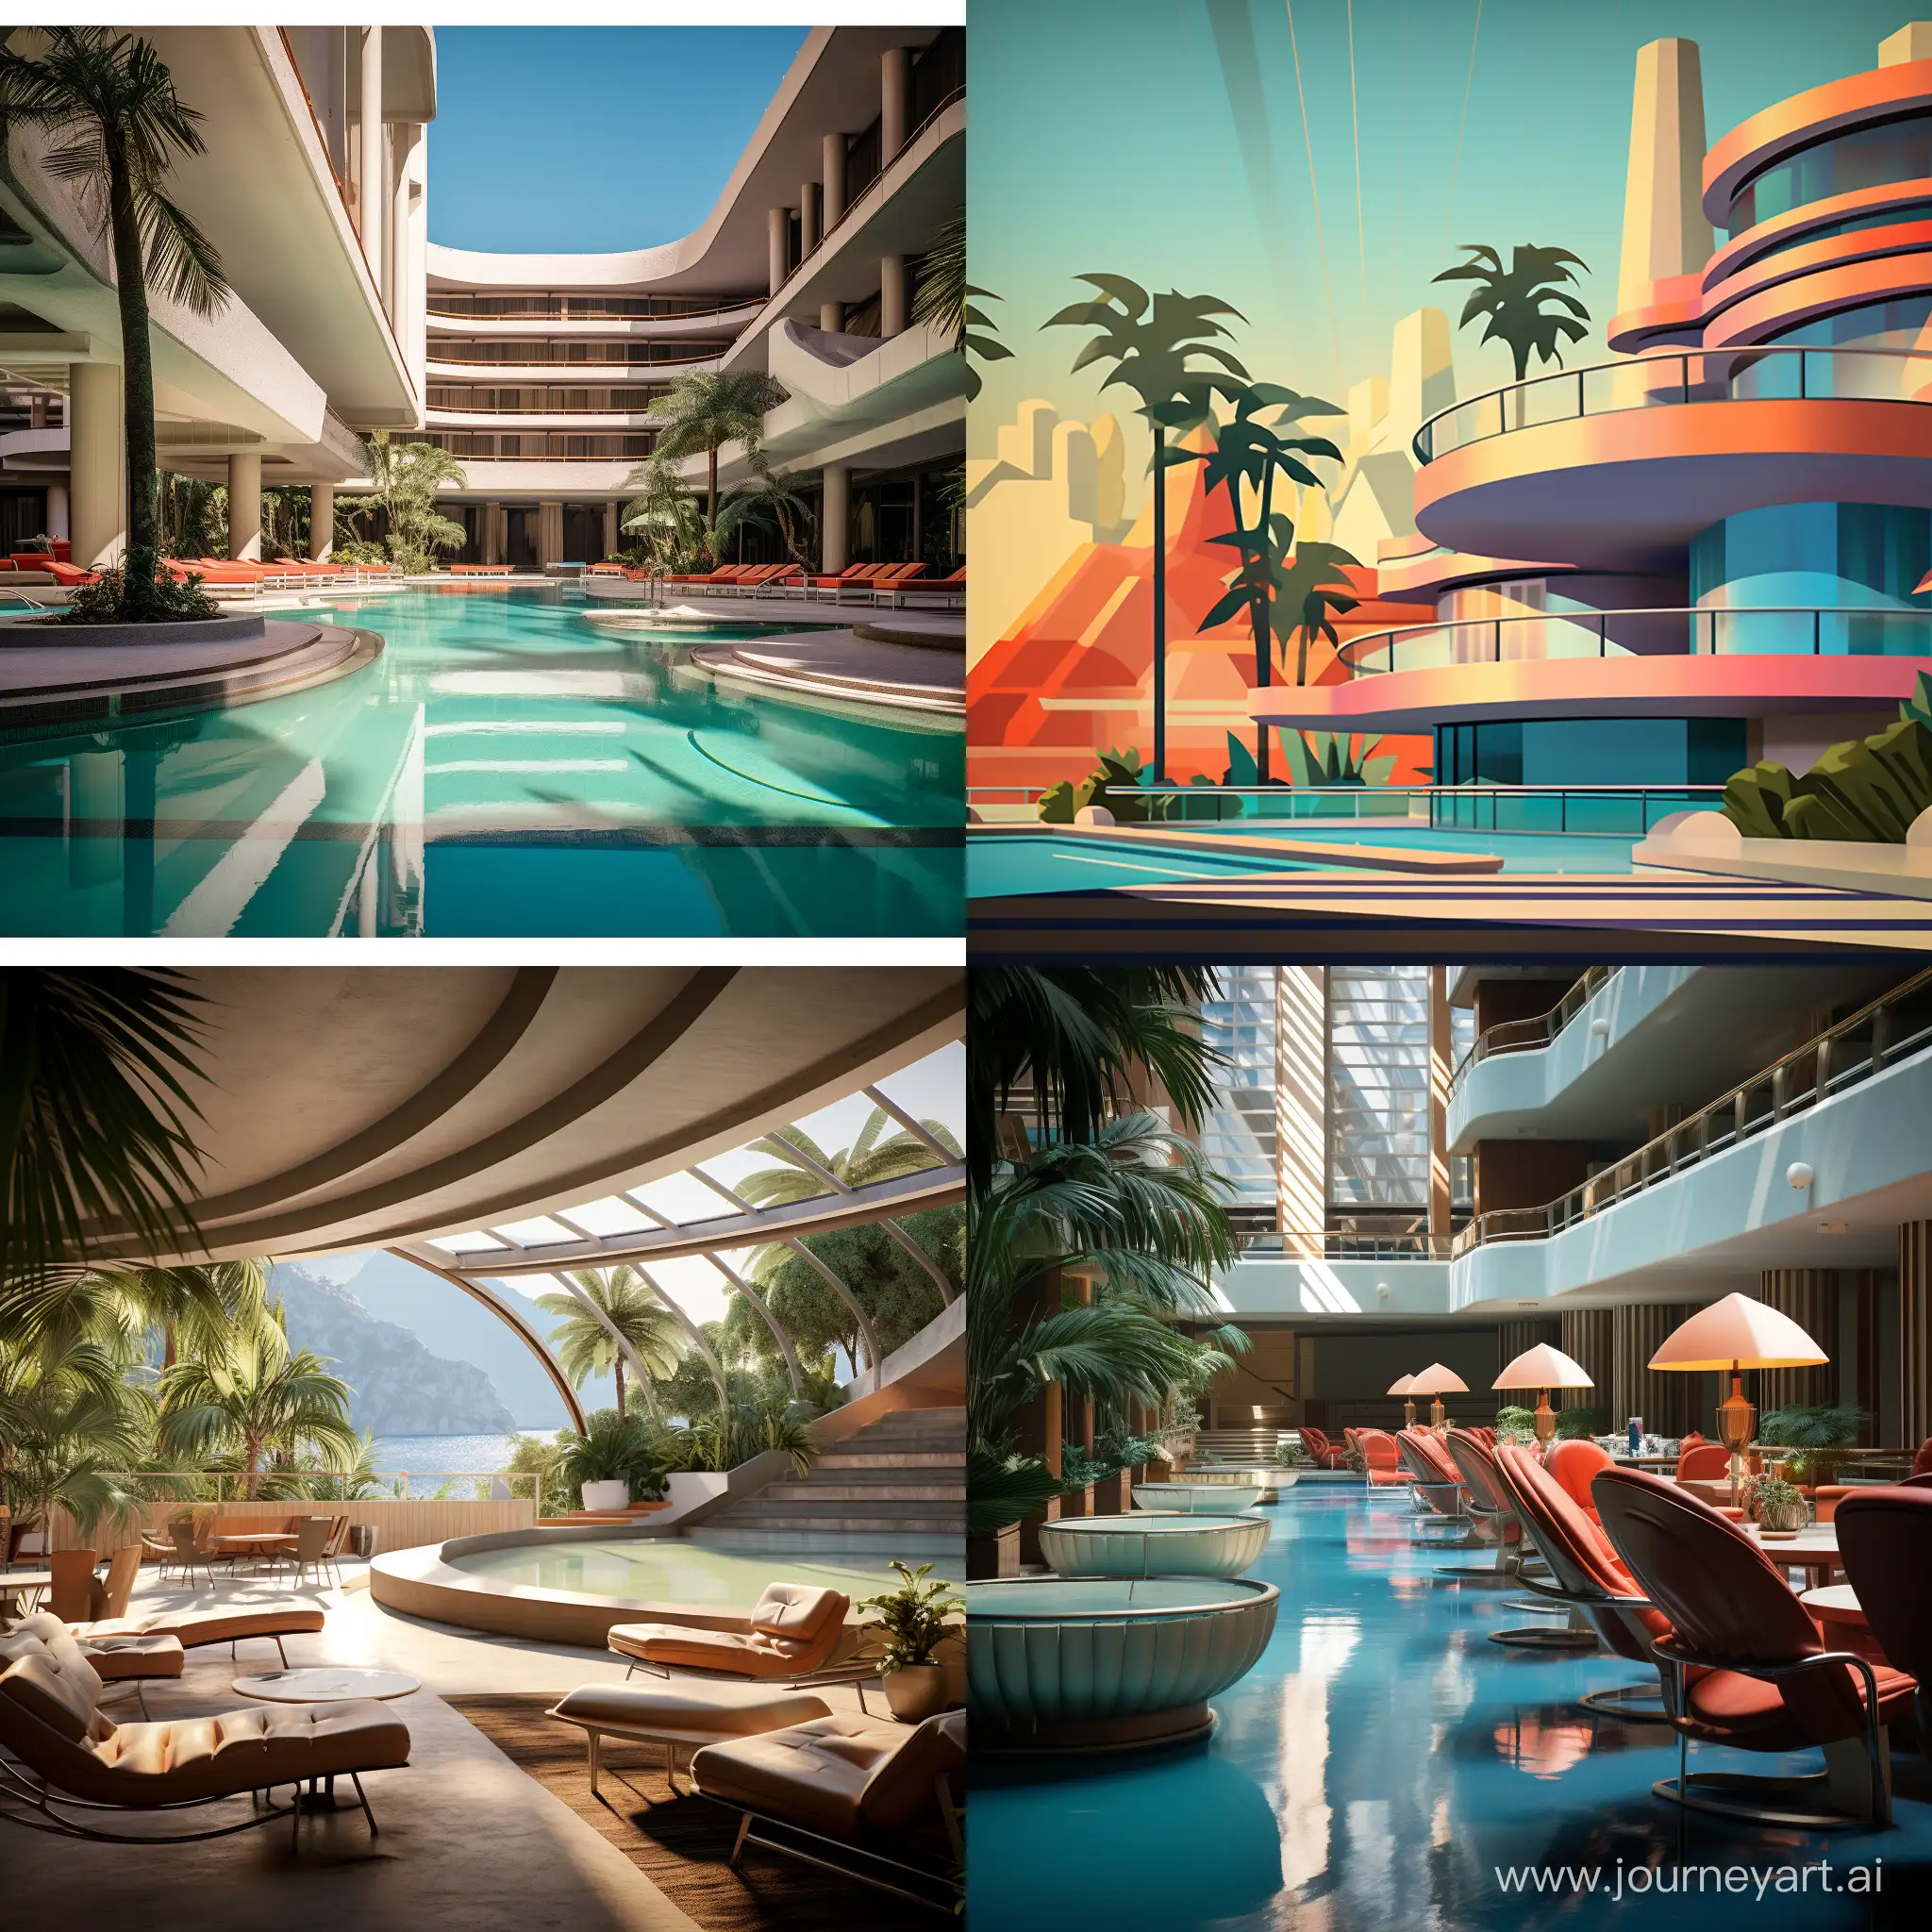 MidCentury-Modern-Architectural-Paradise-in-Tropical-Caribbean-Landscape